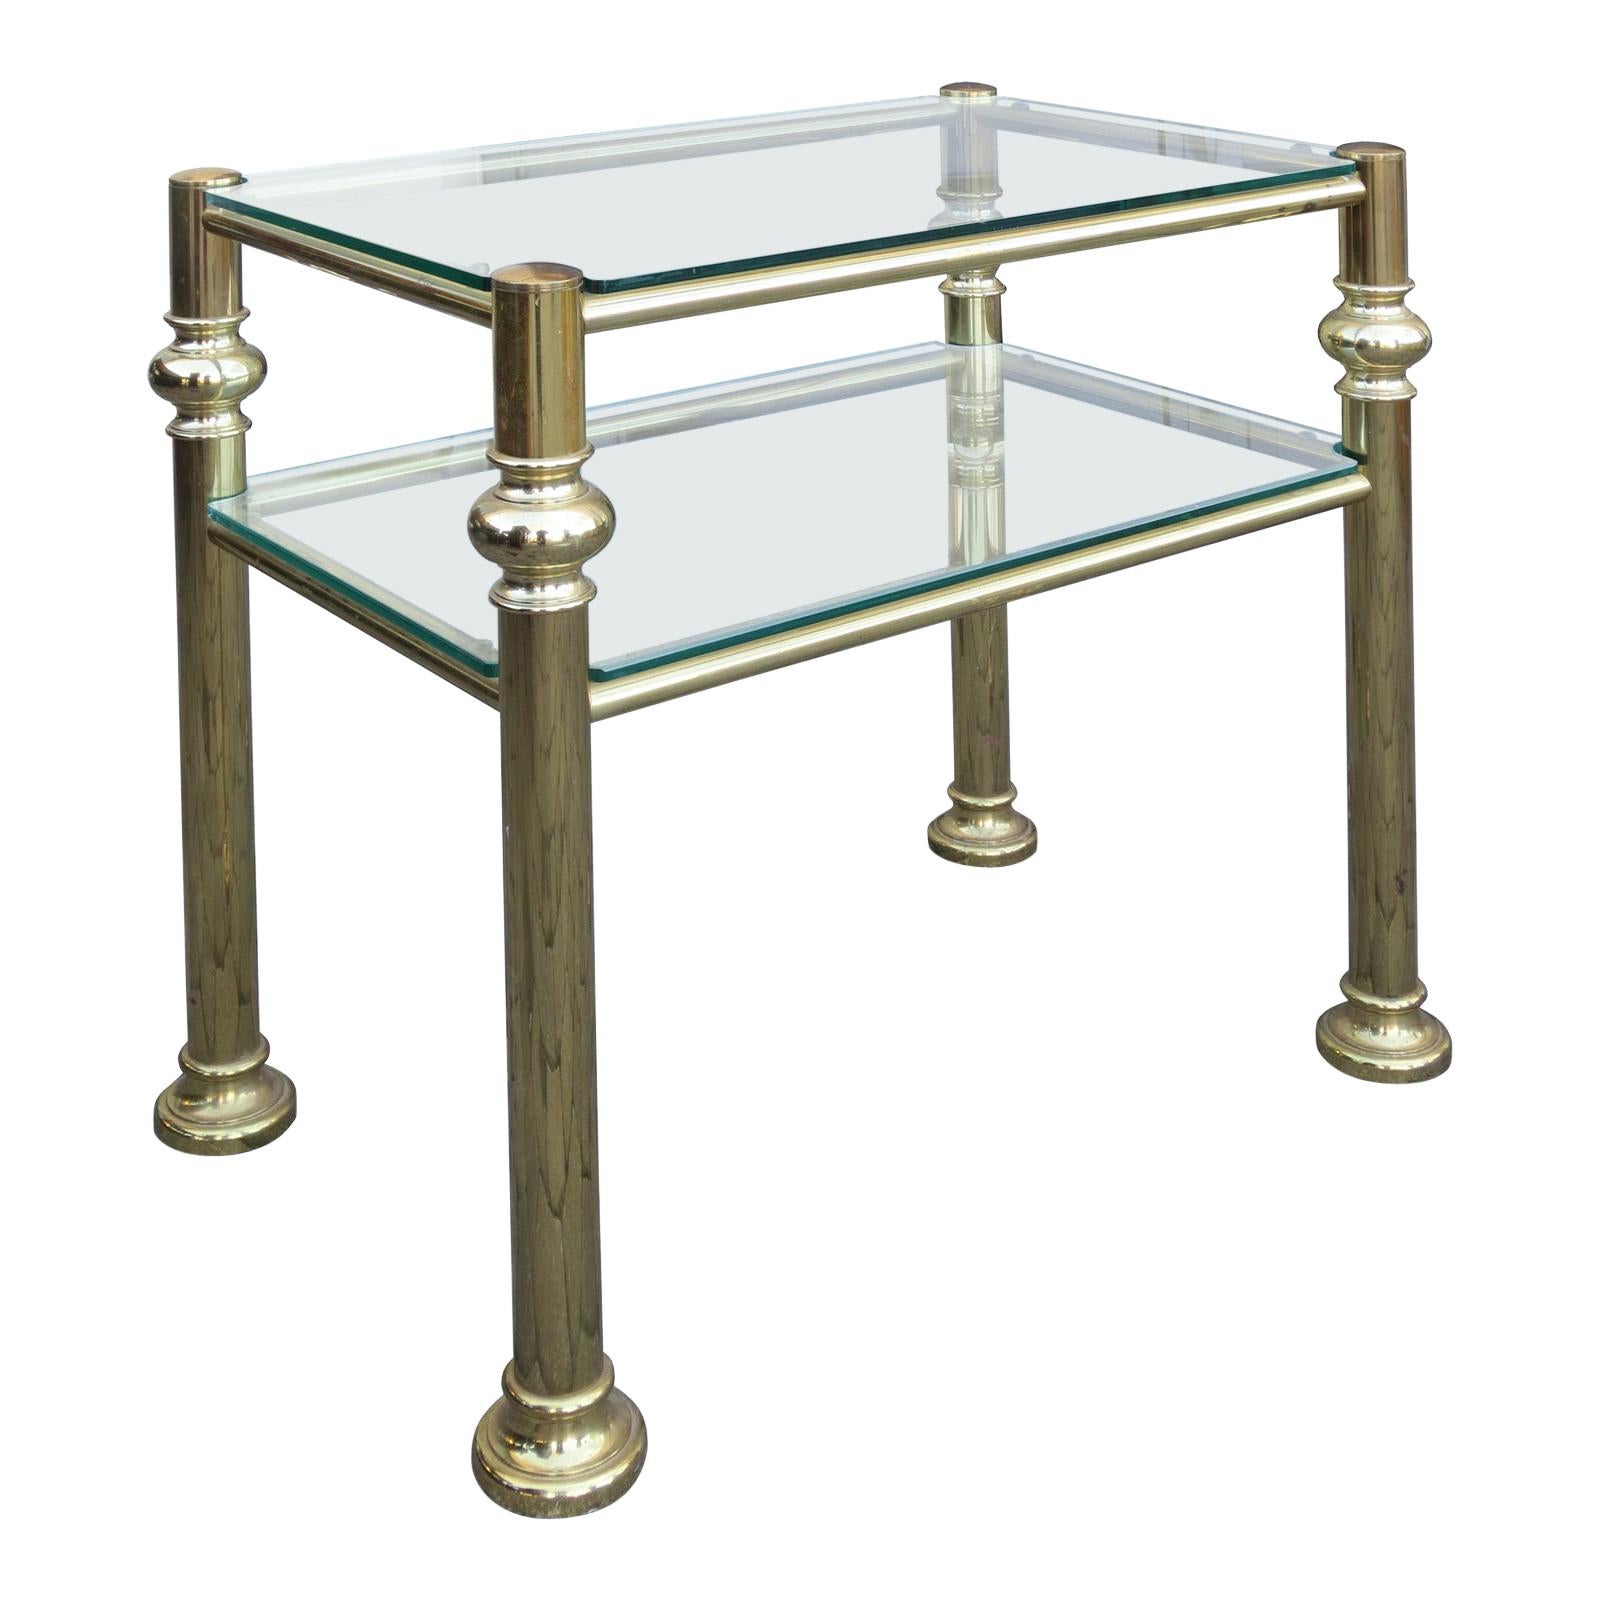 Mid-20th Century Brass and Glass Table by Donghia